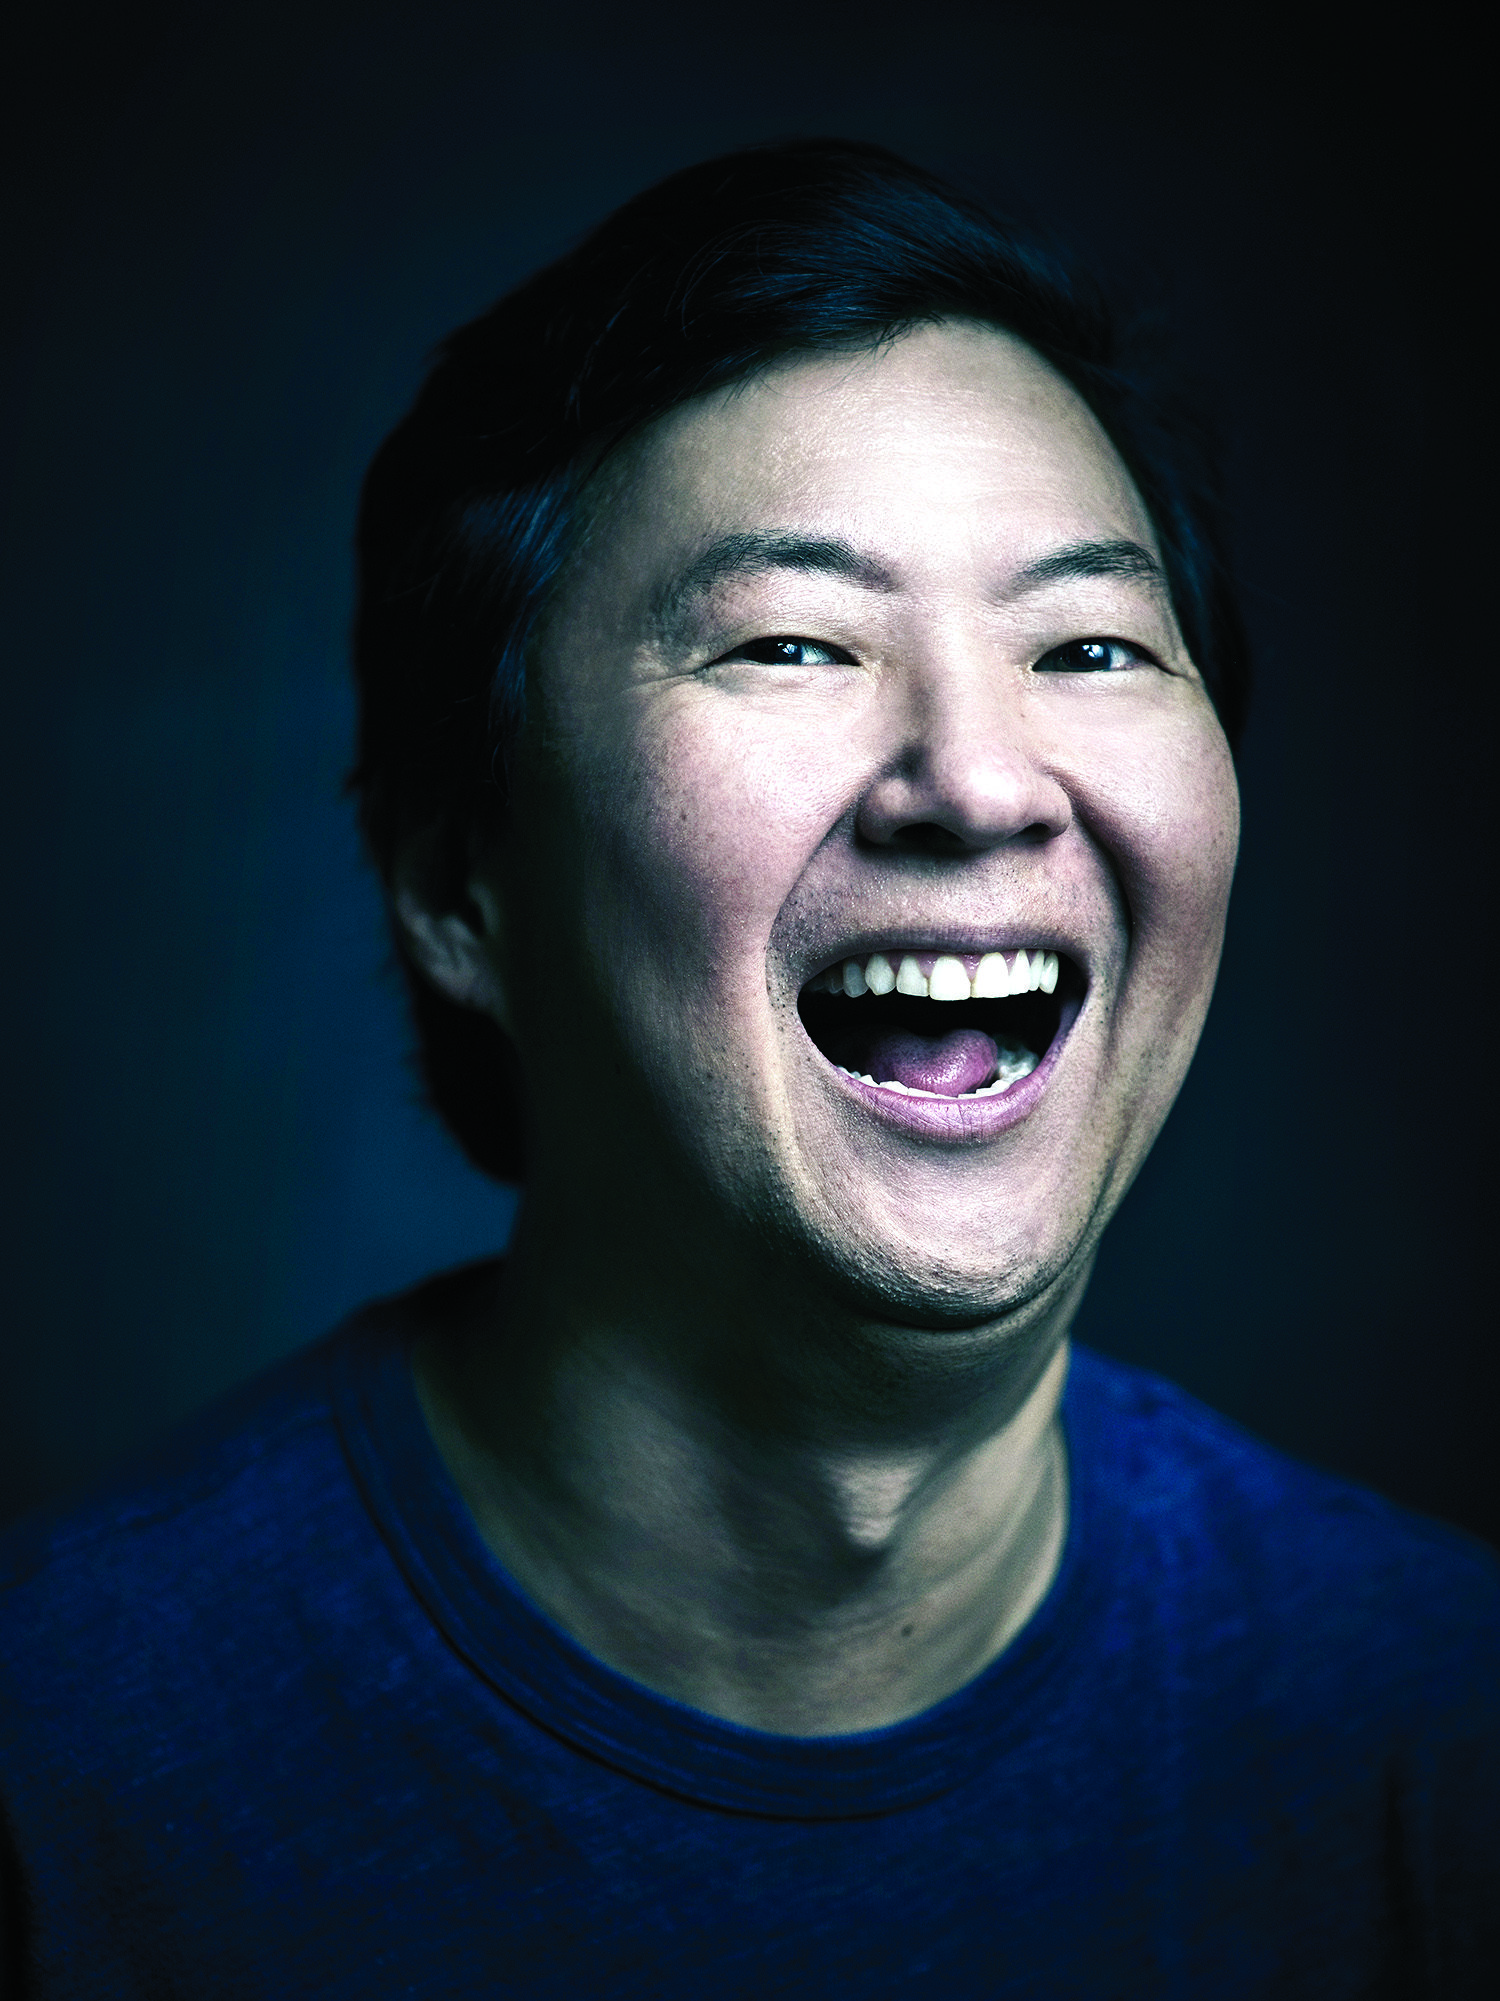 Comedian, actor Ken Jeong to perform at casino